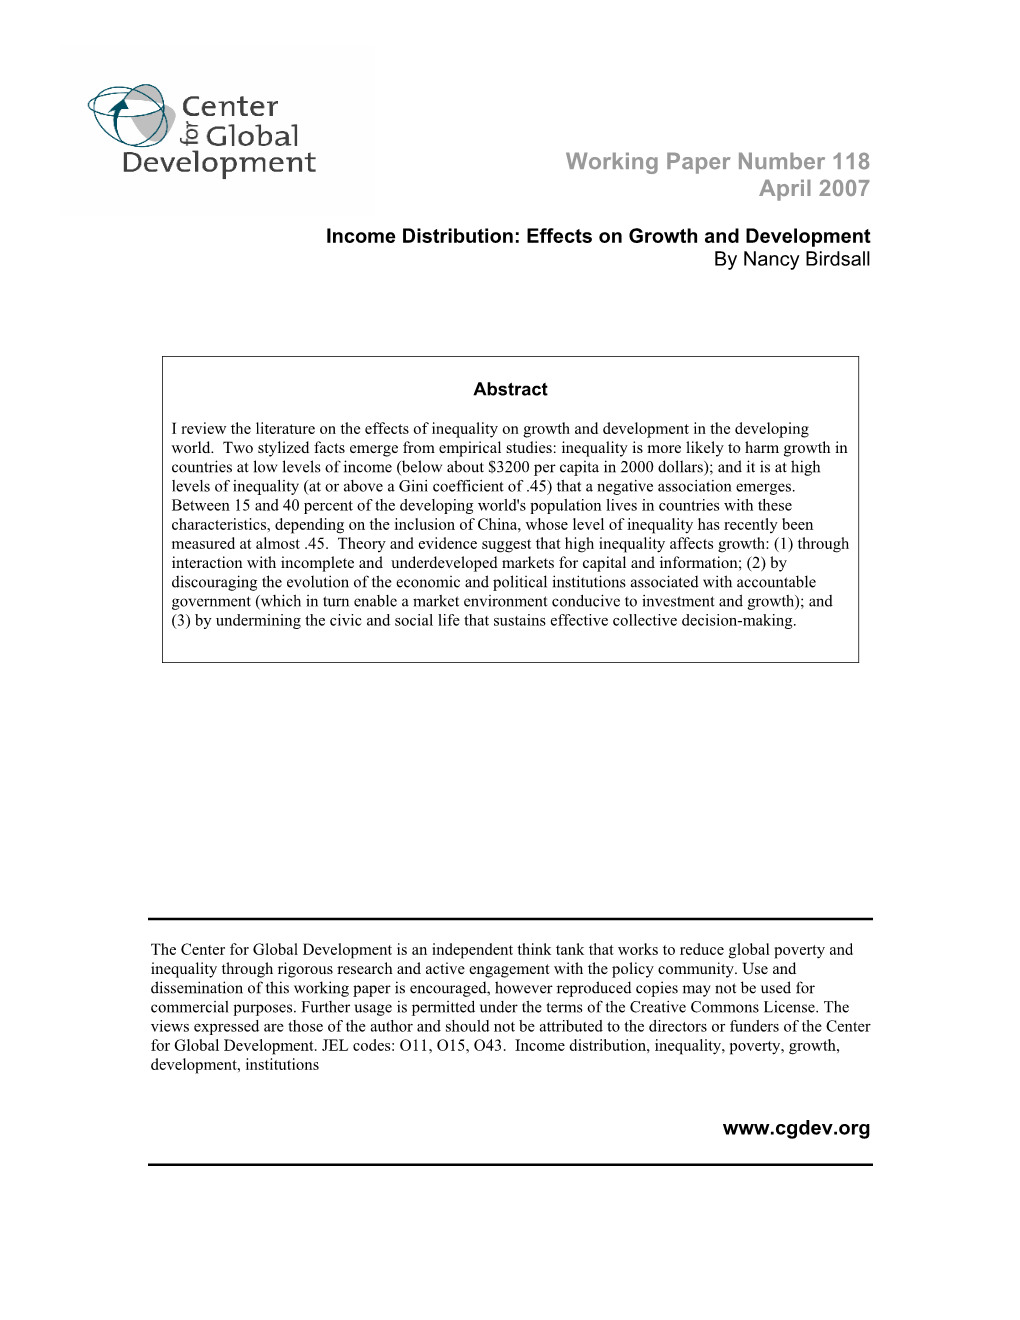 Income Distribution: Effects on Growth and Development by Nancy Birdsall